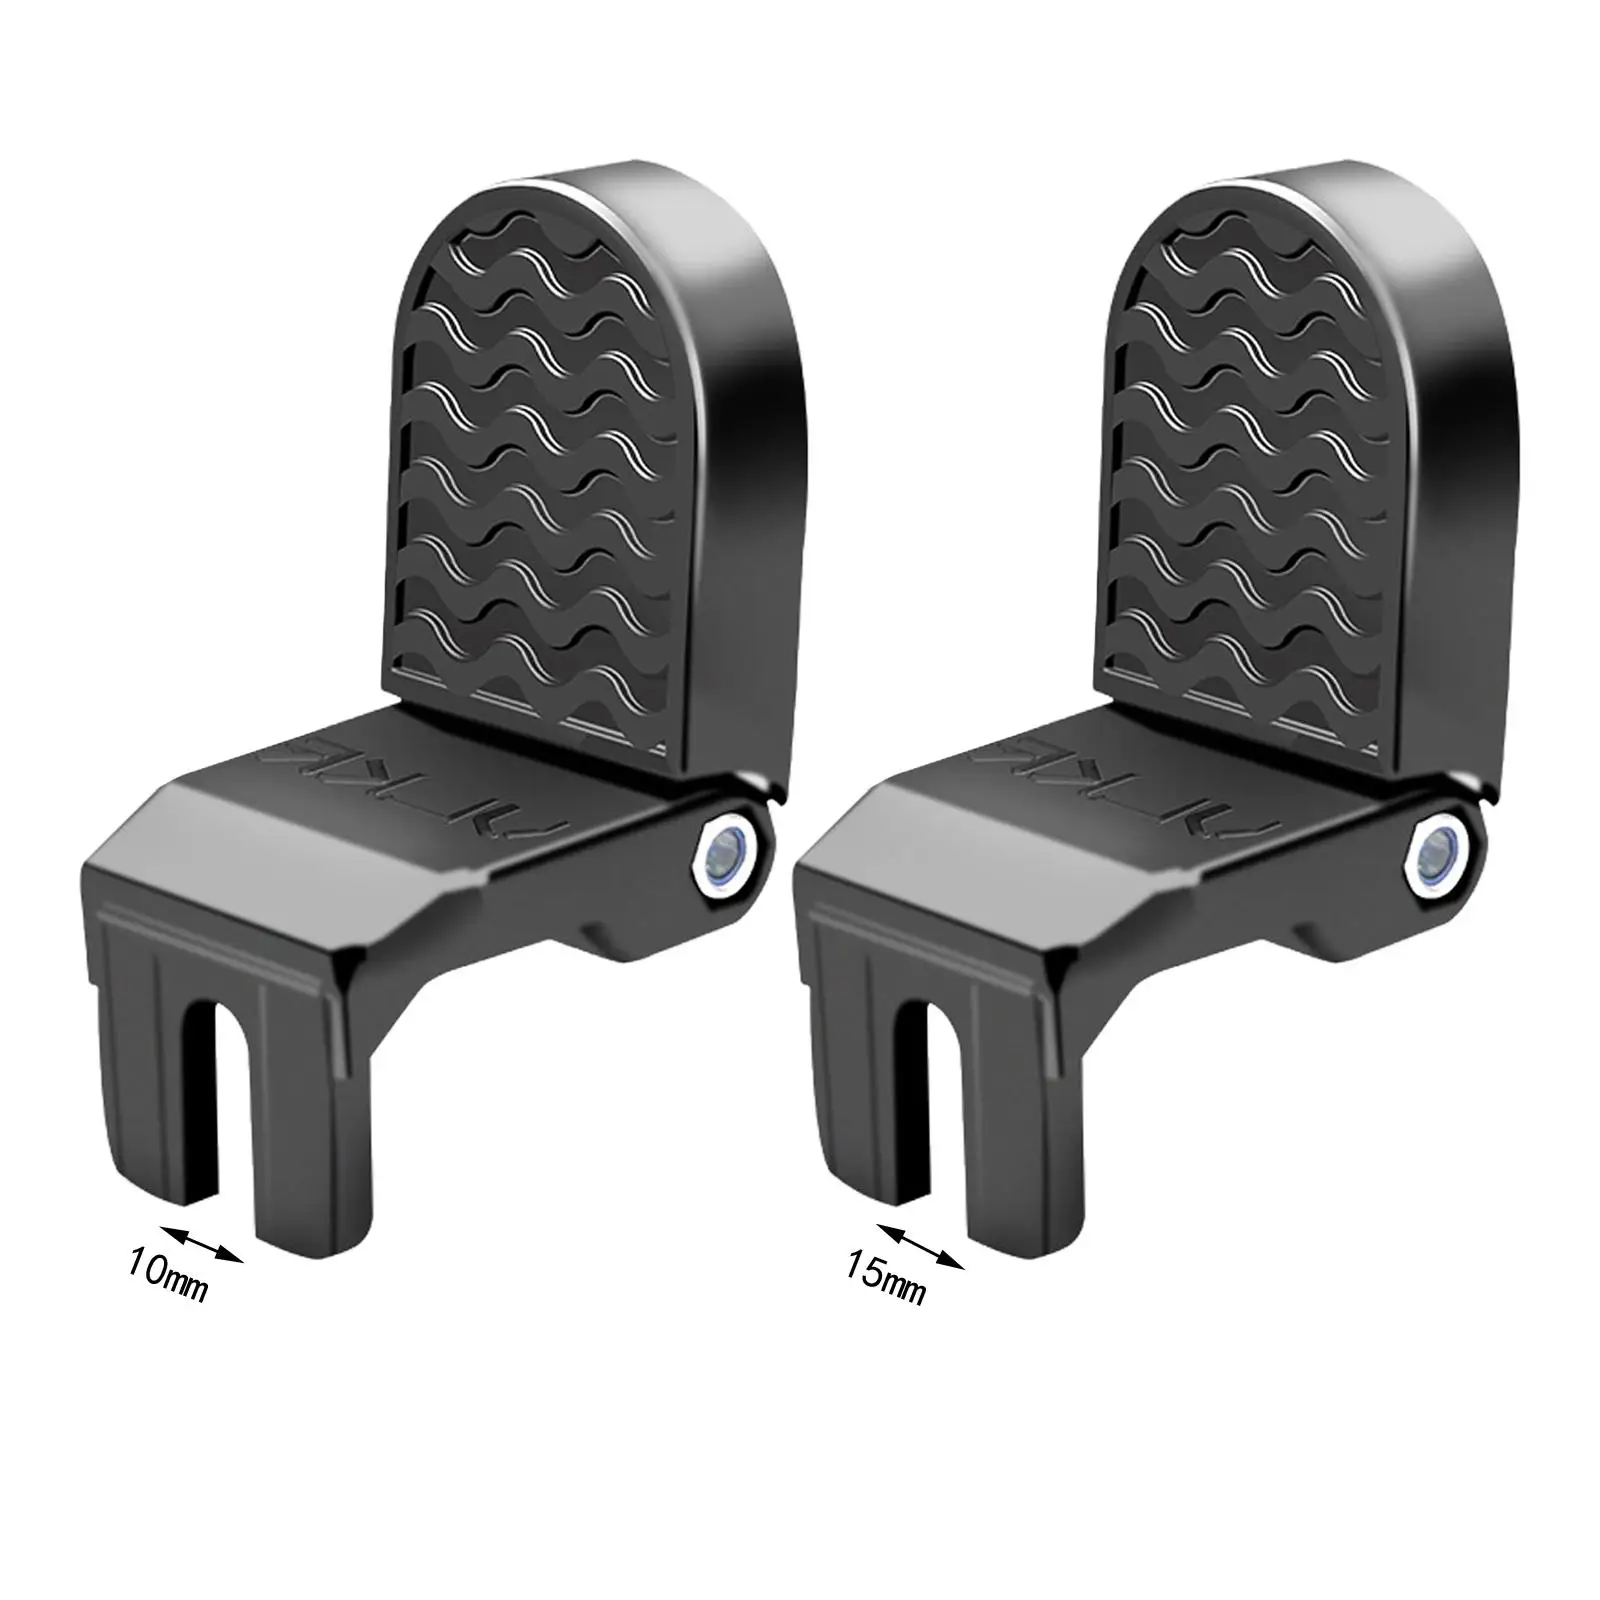 2x Motorbike Bike Rear Pedals Footpeg Cycling Accessories Bicycle Footrest